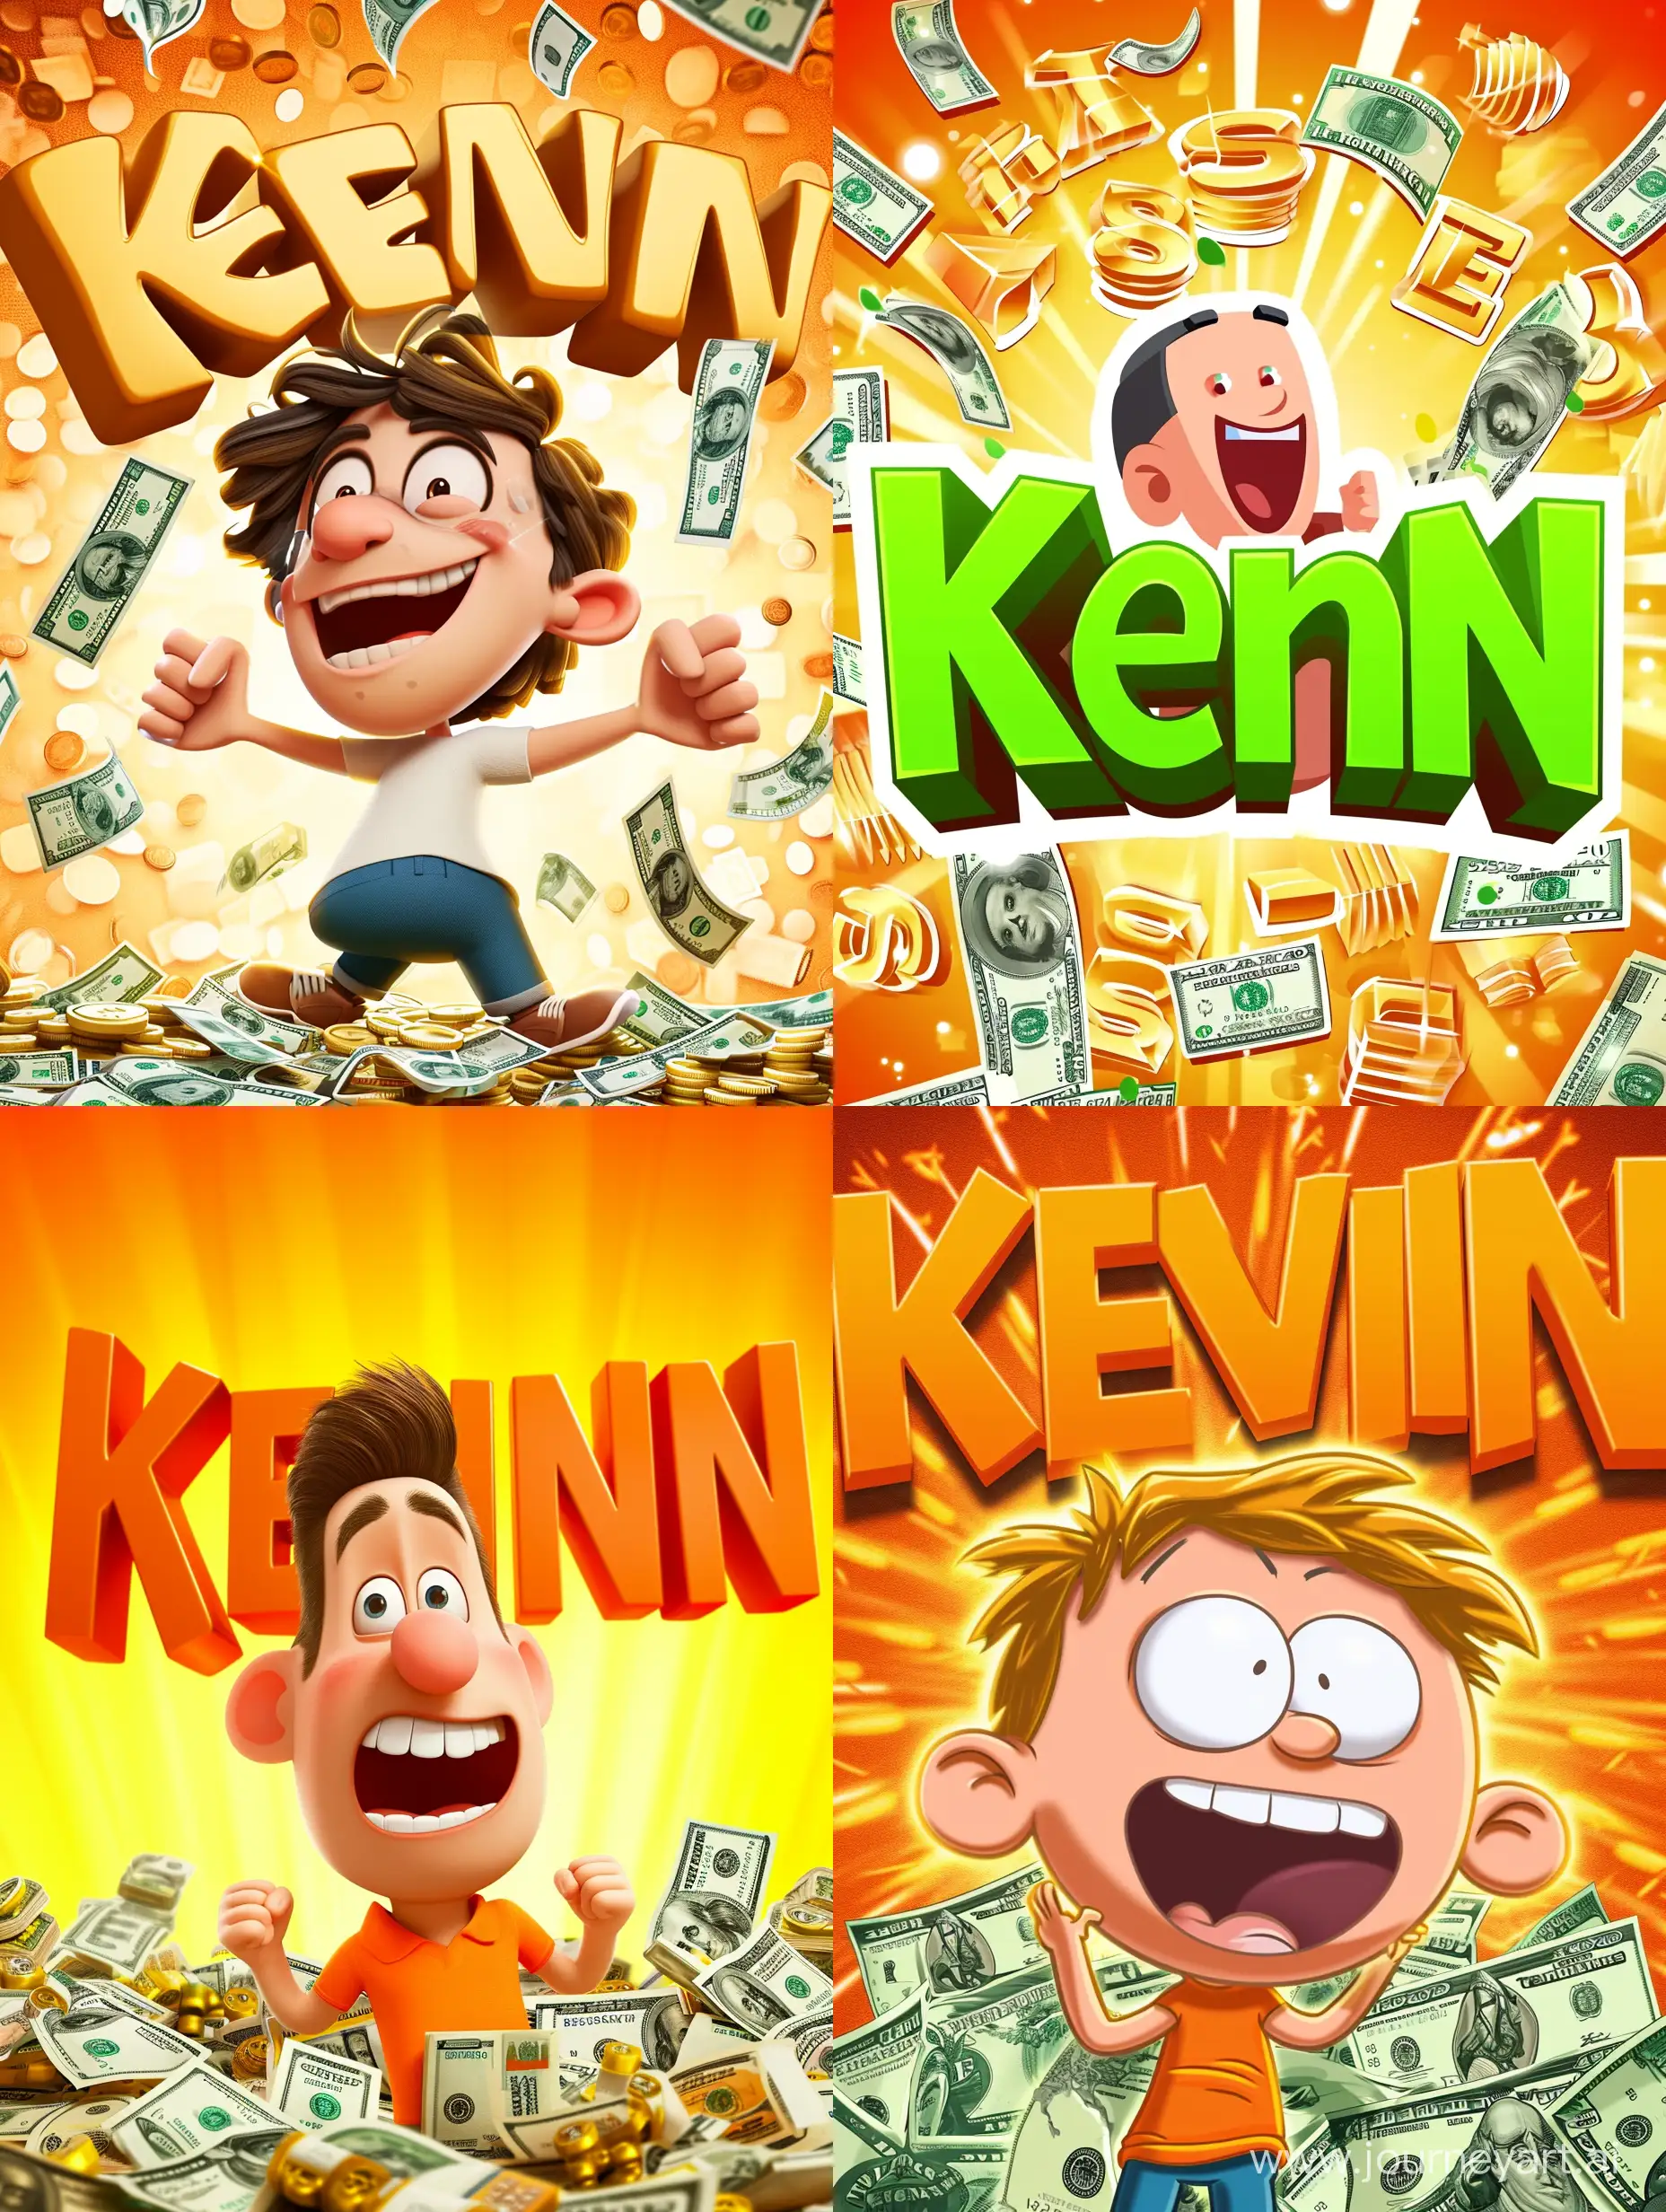 Kevin-Surrounded-by-Wealth-Vibrant-Image-of-Abundance